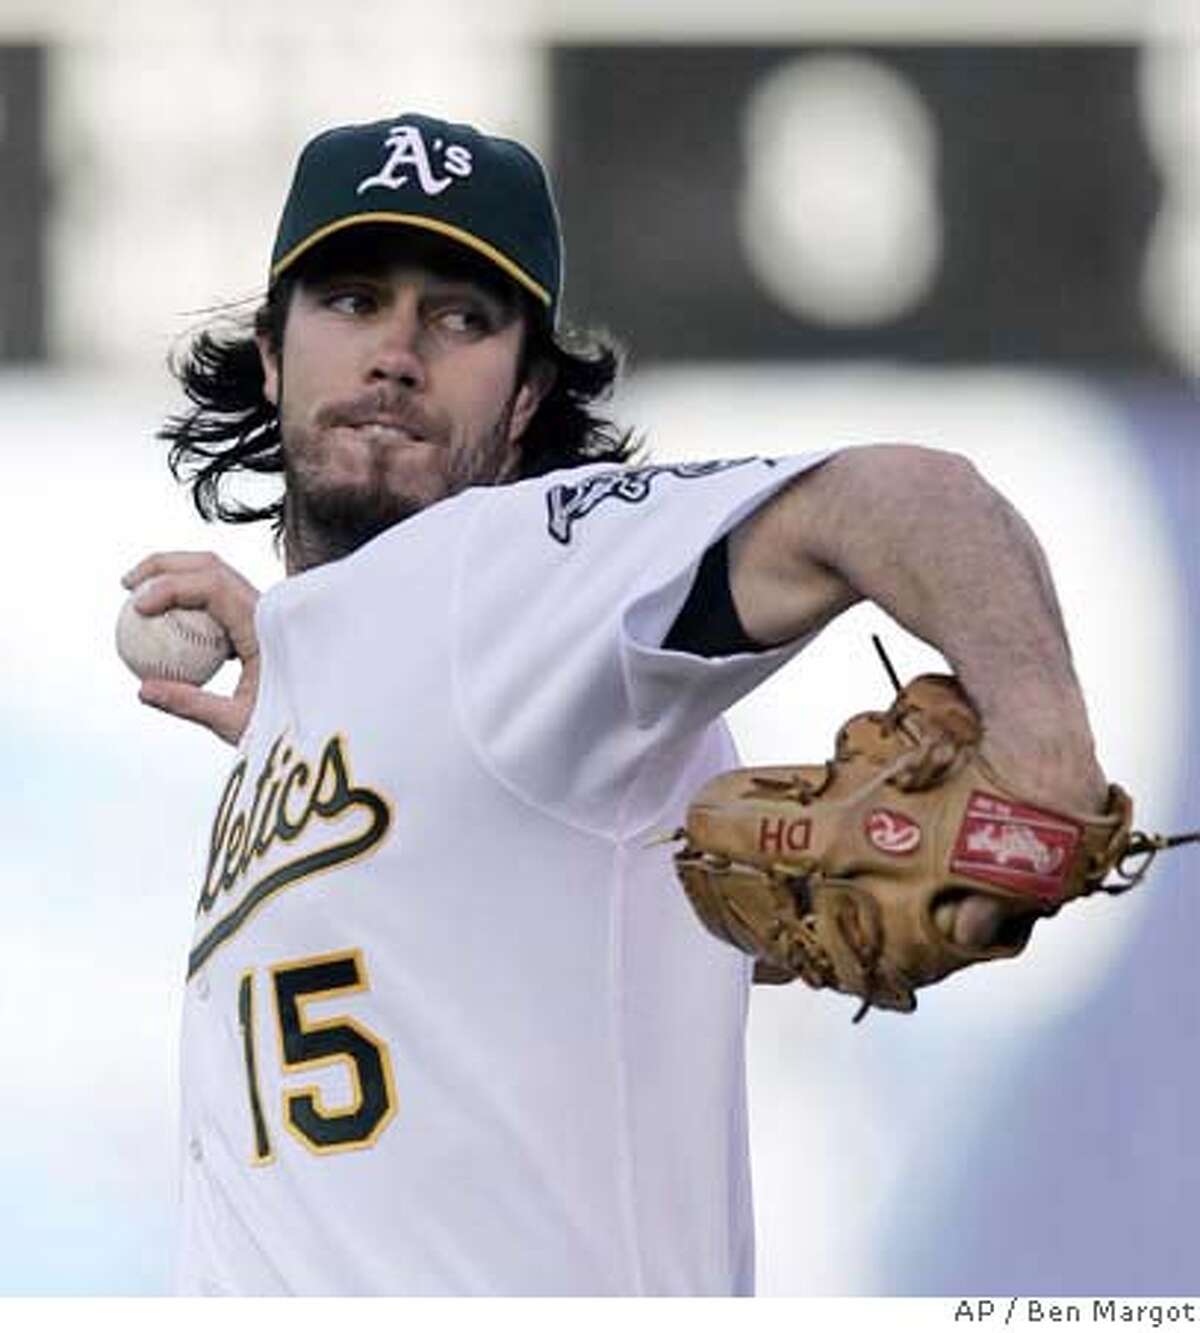 Oakland Athletics' Dan Haren works against the Seattle Mariners in the first inning of a baseball game Friday, July 6, 2007, in Oakland, Calif. (AP Photo/Ben Margot)